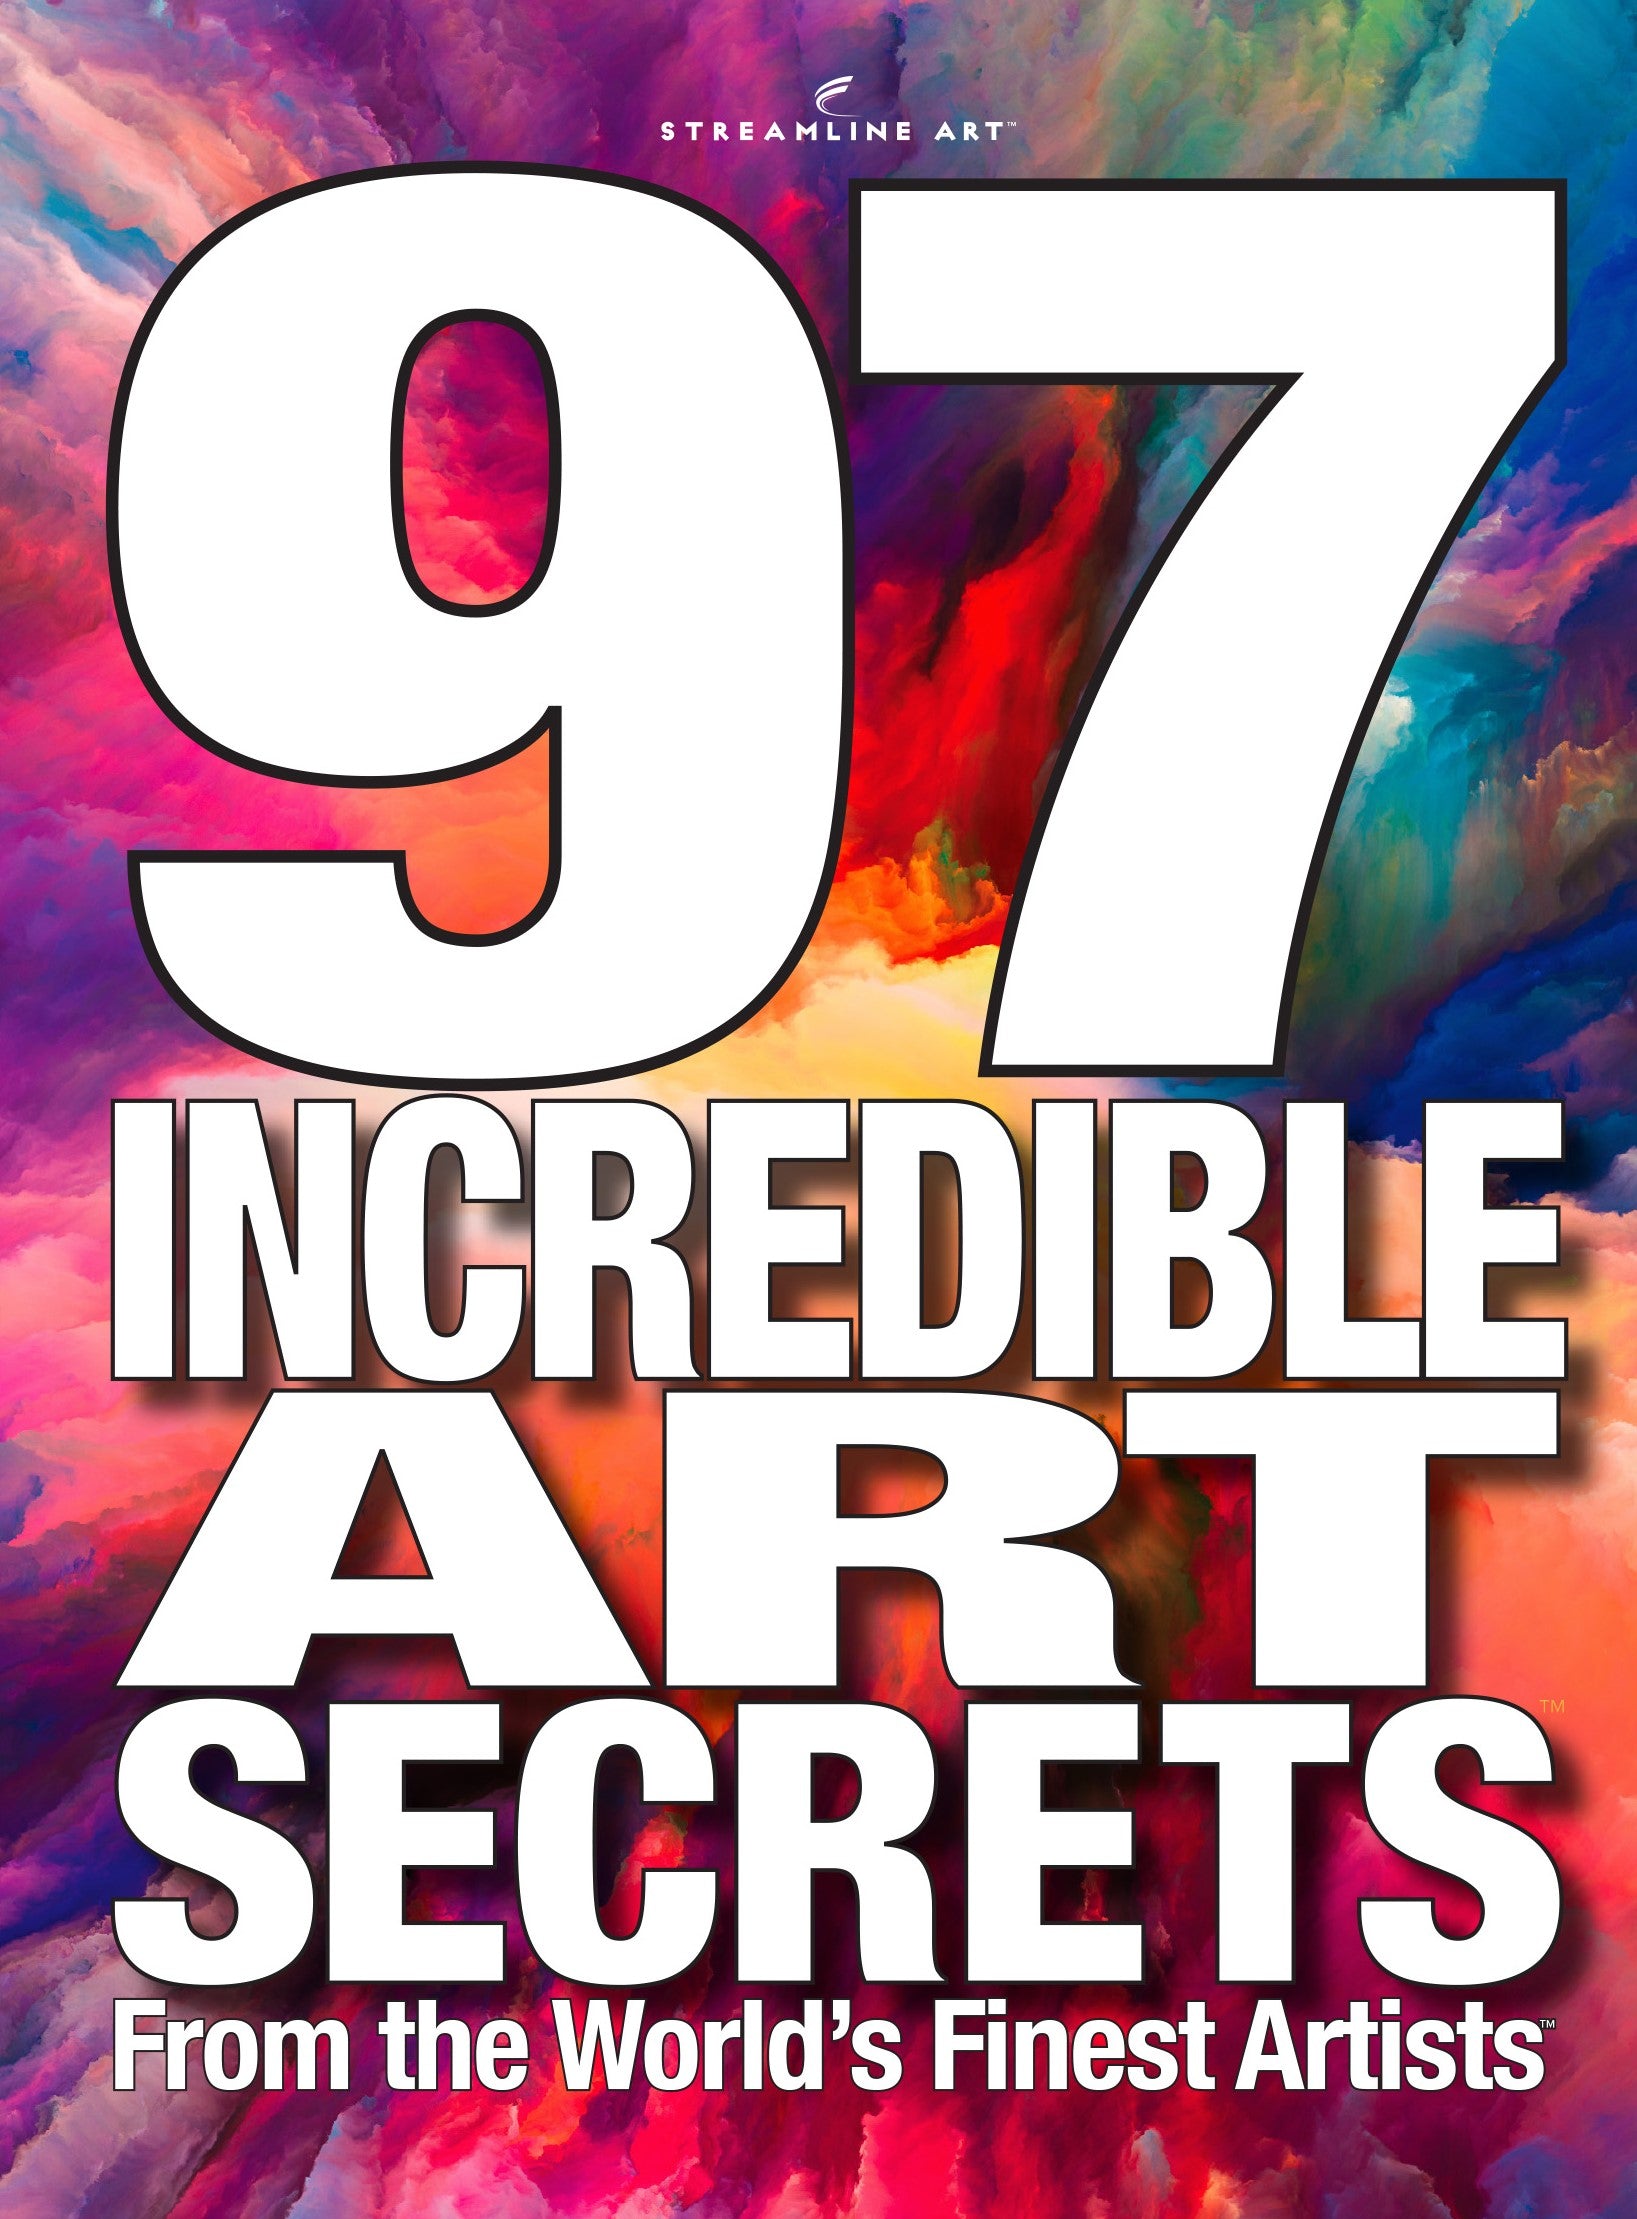 97 Incredible Art Secrets From The World's Finest Artists